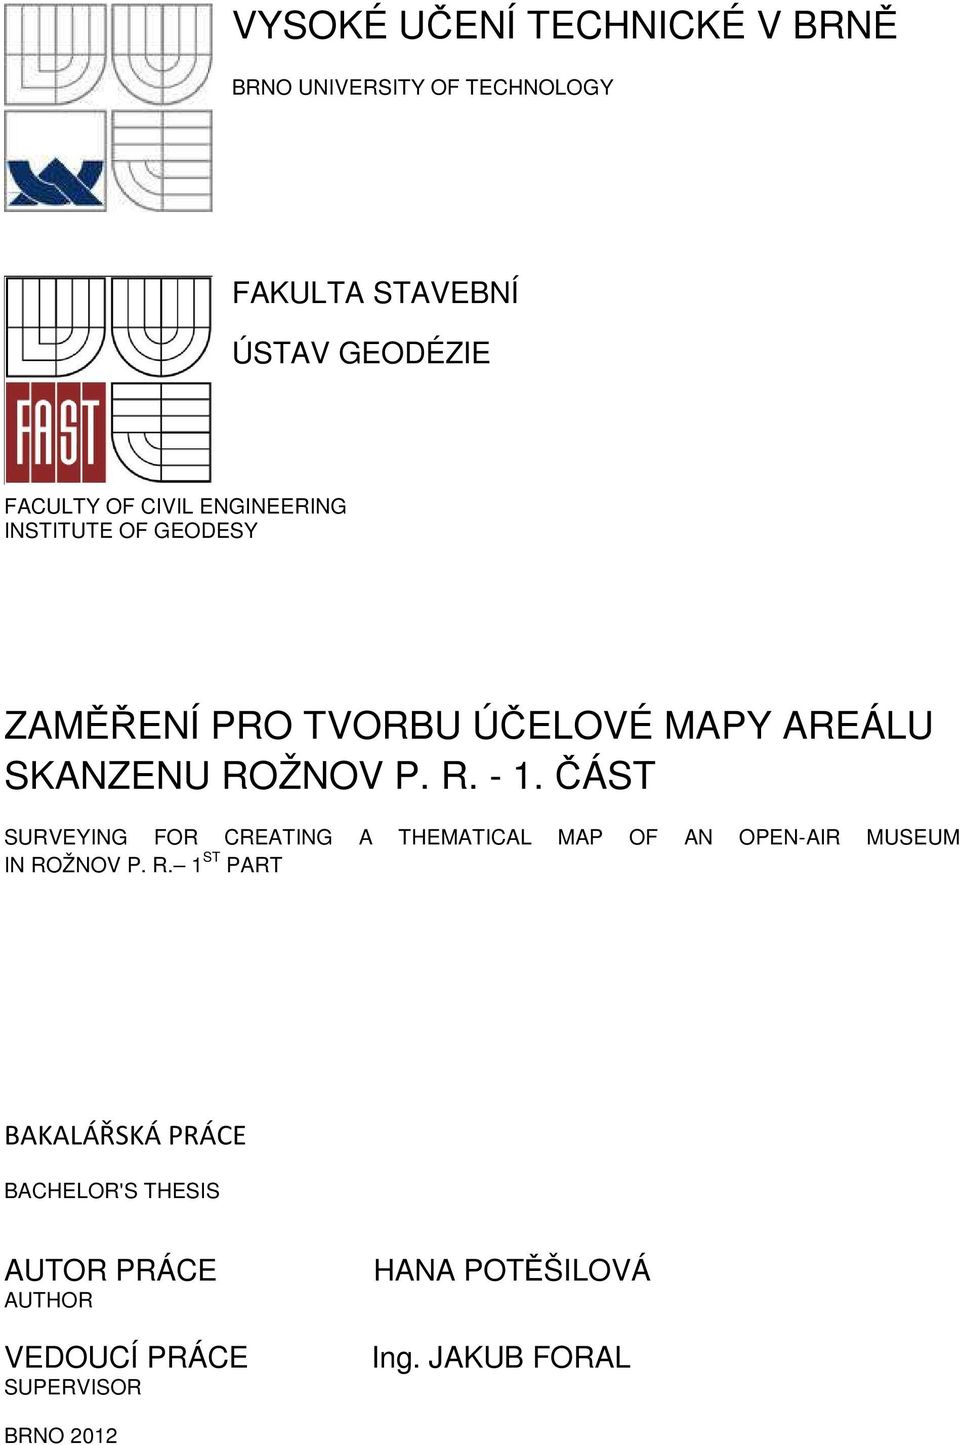 ČÁST SURVEYING FOR CREATING A THEMATICAL MAP OF AN OPEN-AIR MUSEUM IN RO